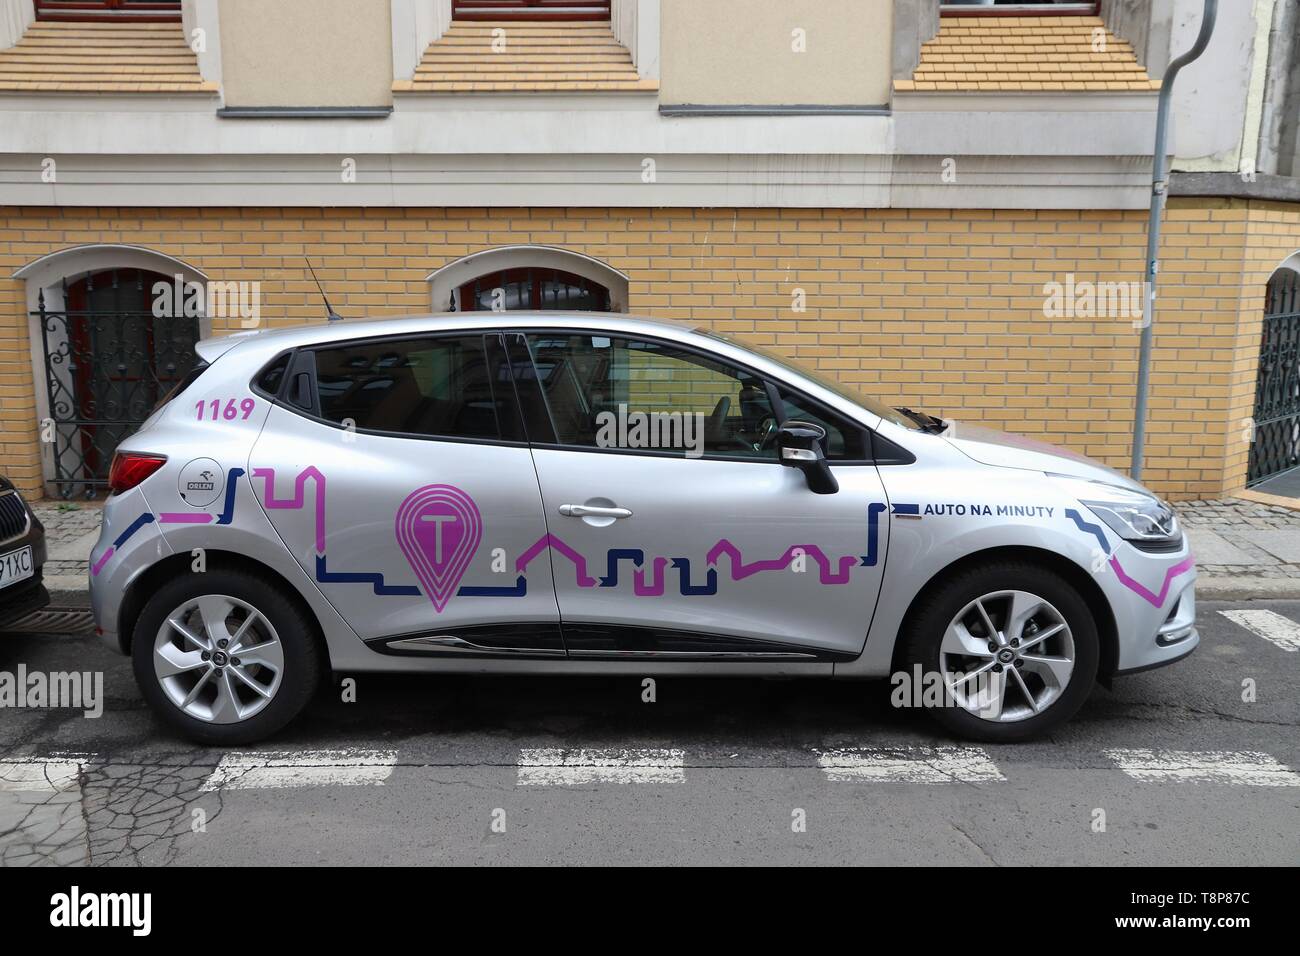 WROCLAW, POLAND - MAY 11, 2018: Traficar vehicle in Wroclaw, Poland. Traficar is a car sharing company with more than 1,100 vehicles. Stock Photo